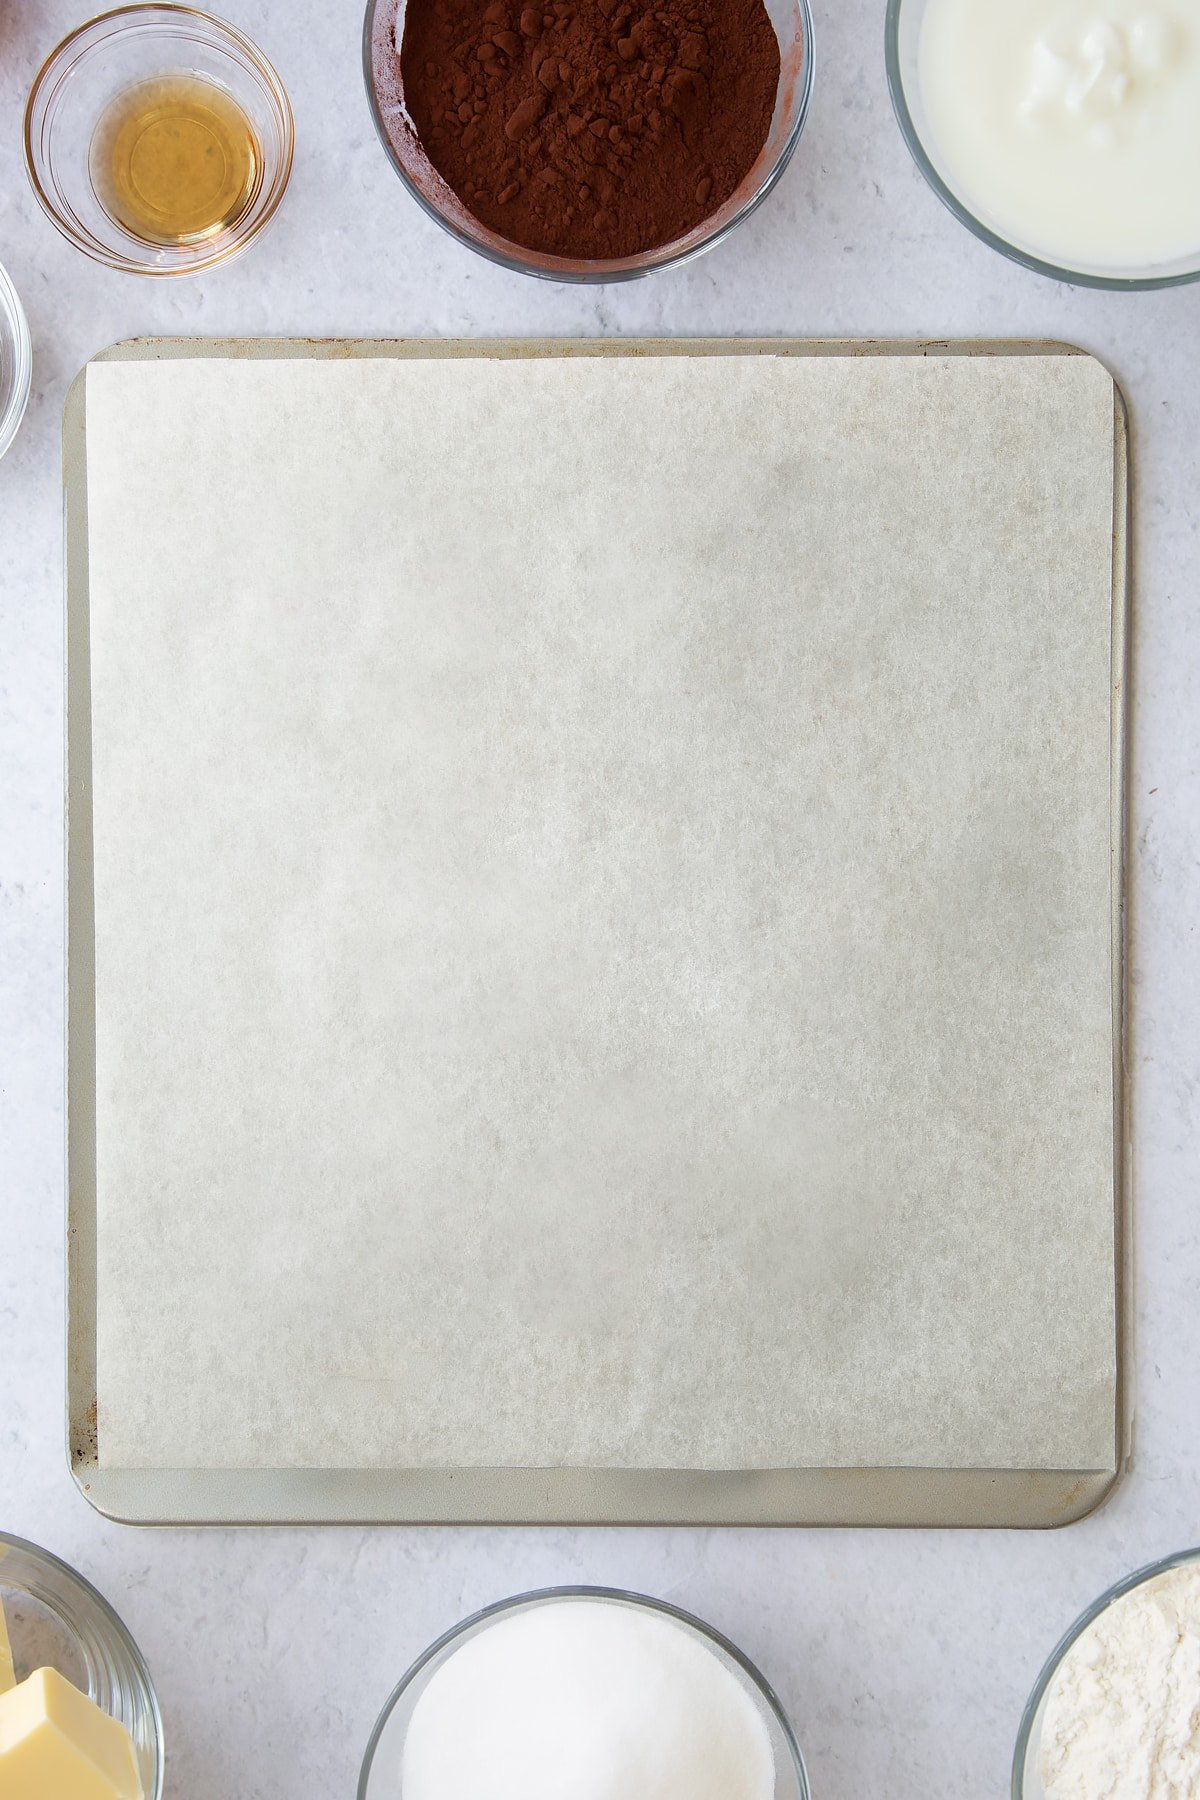 a large baking tray lined with parchment paper.